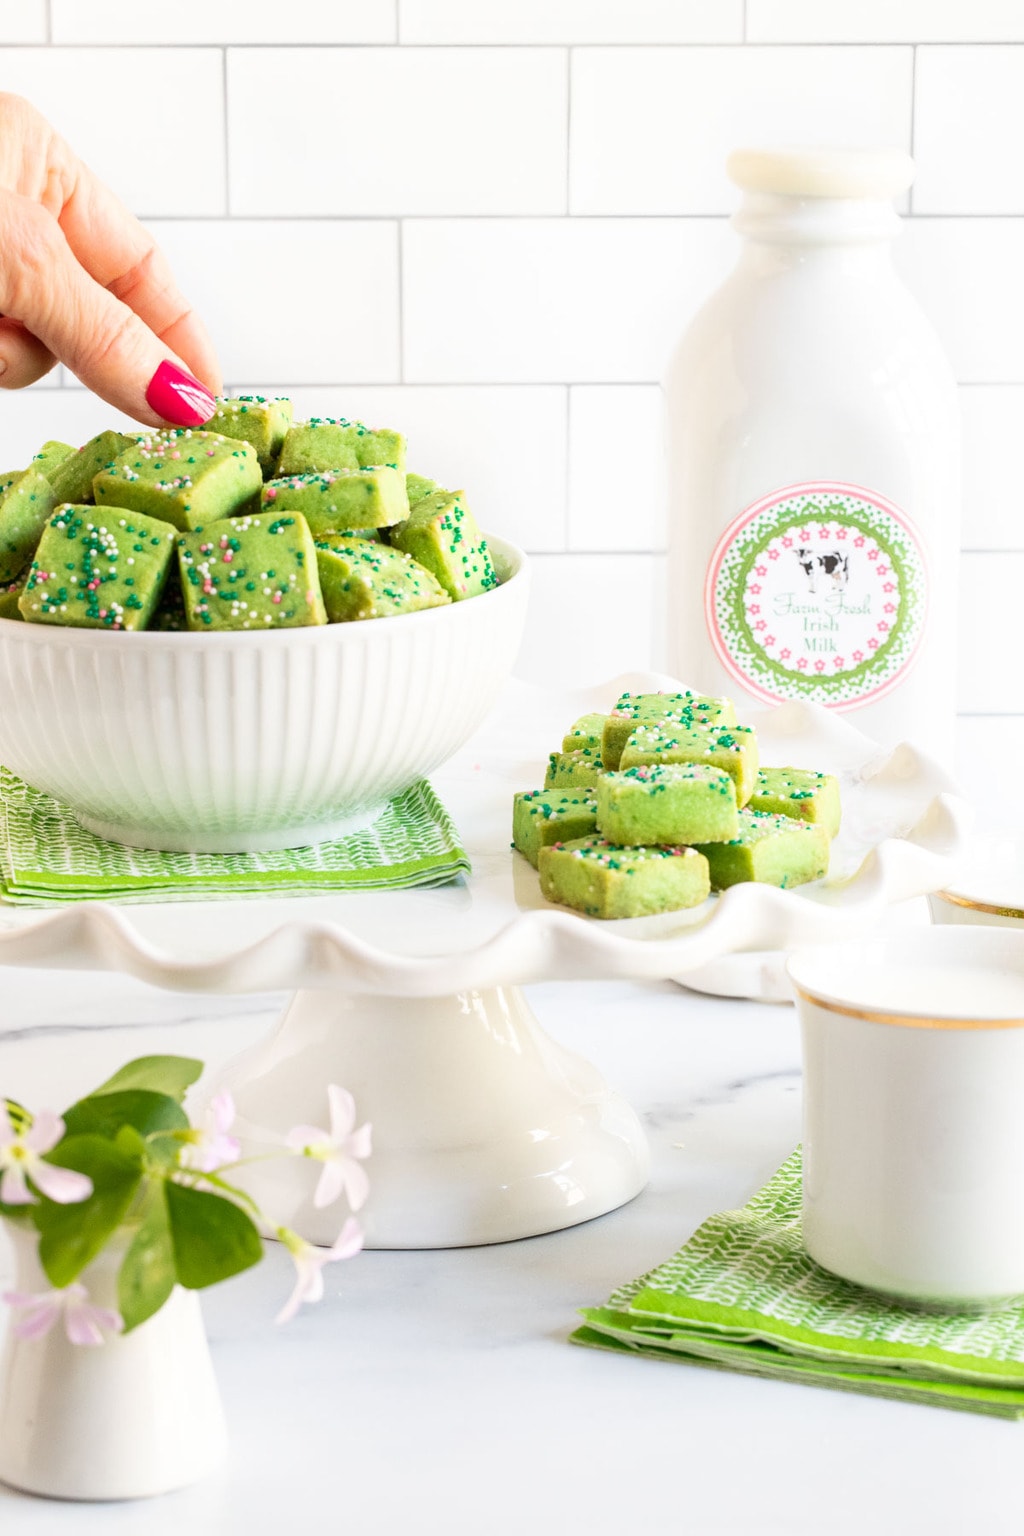 Vertical photo of a bowl of Leprechaun Shortbread Bites in a serving bowl with a shamrock plant in the foreground and a quart of Irish milk in the background. A hand is taking one of the shortbread bites.